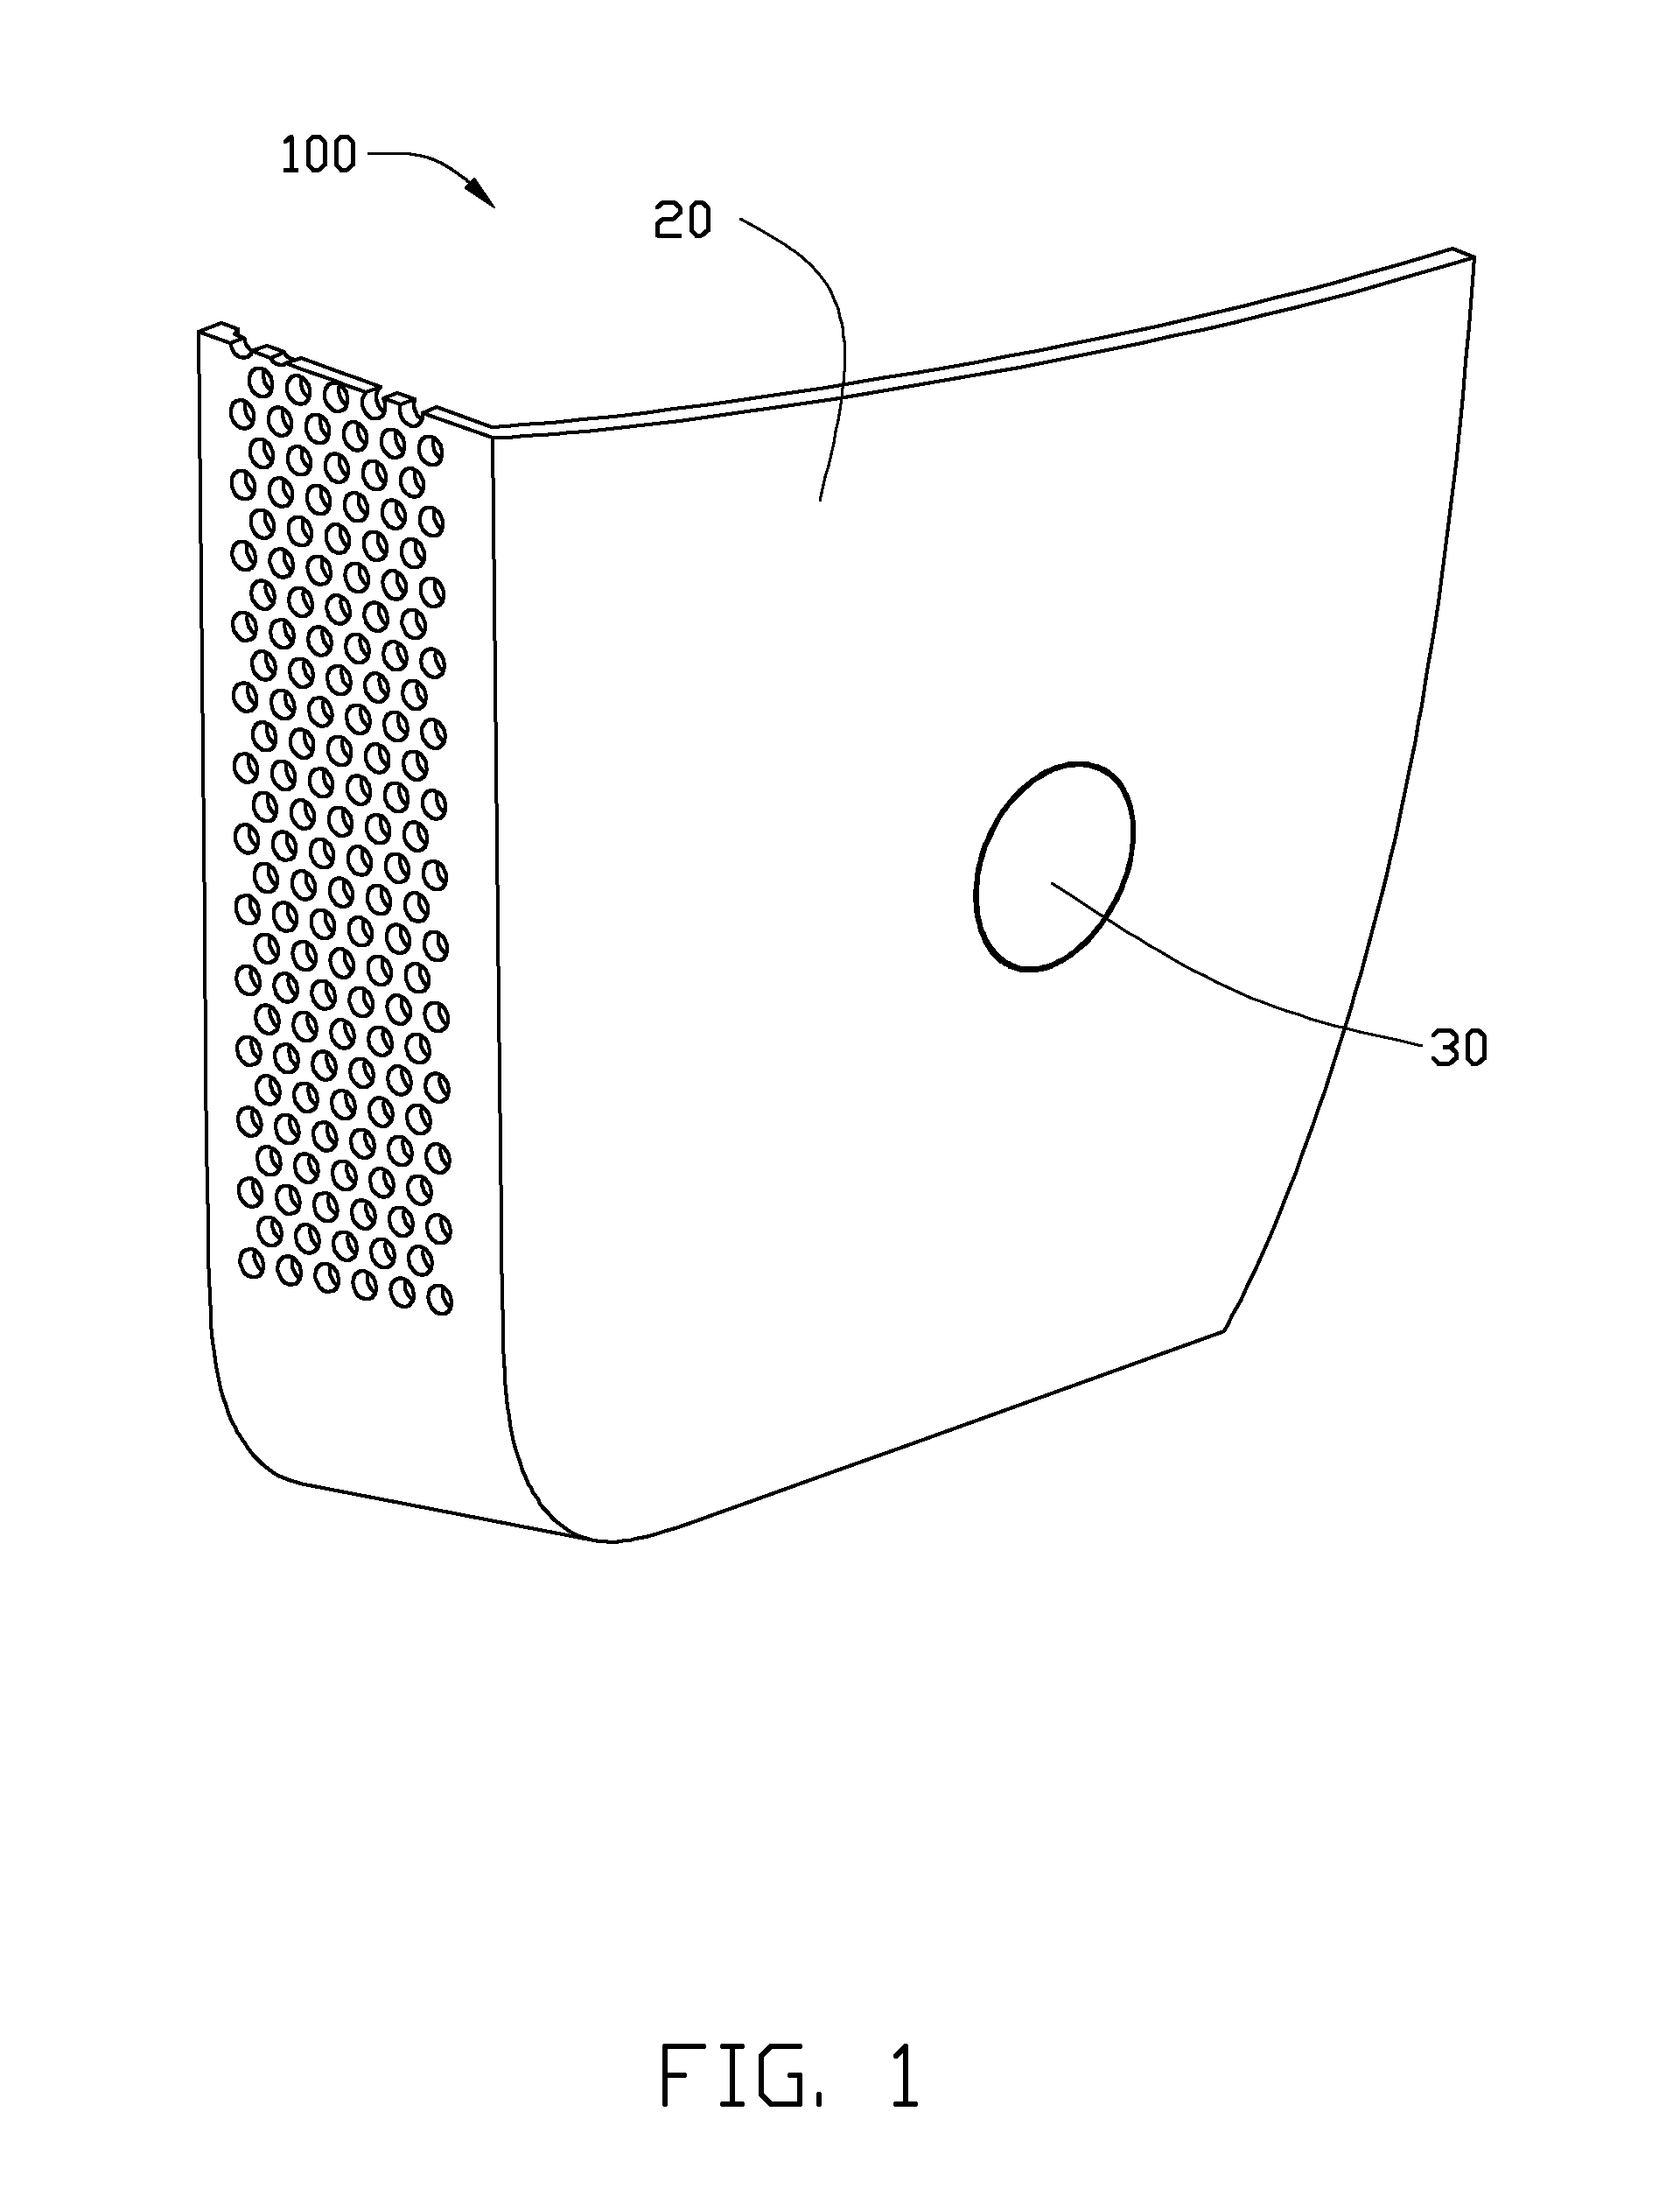 Electronic device with power button assembly